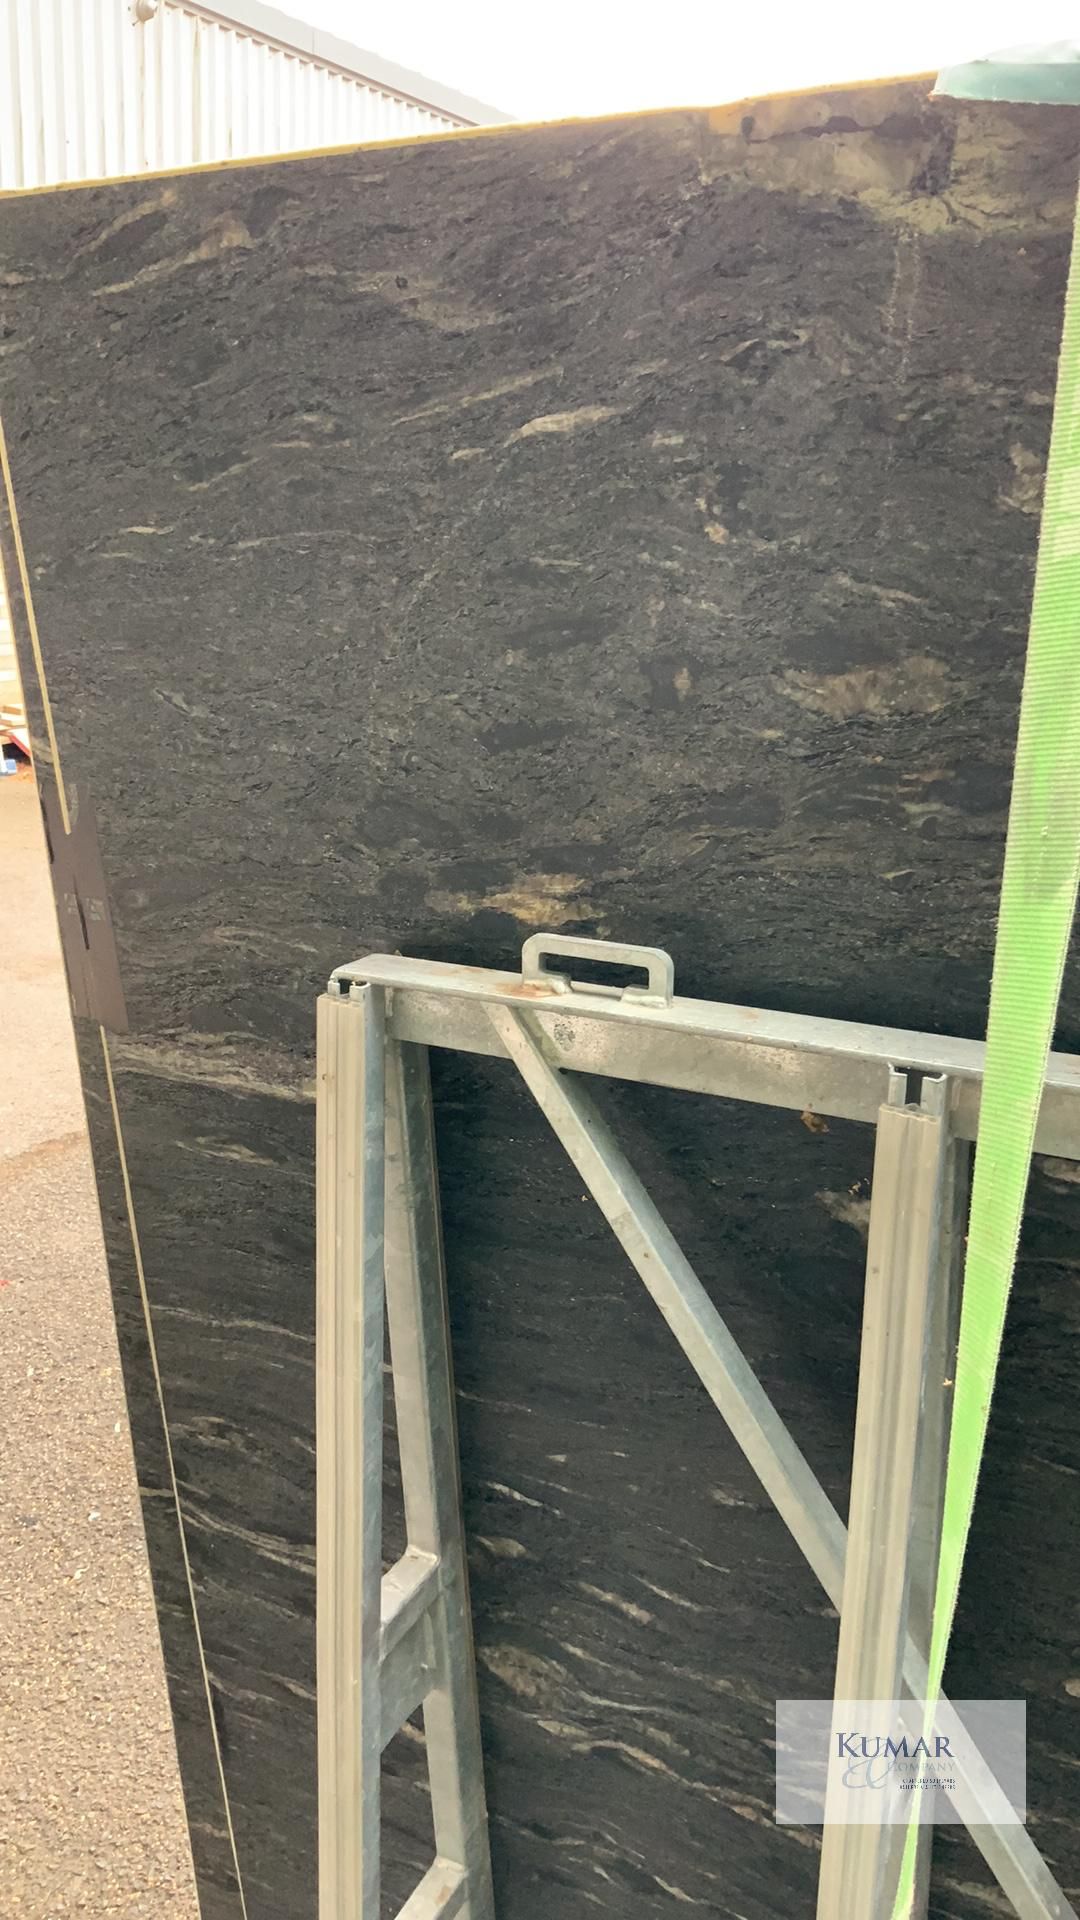 Quantity of Italian Black Granite - Cost Price in Excess of £3,000 1 x 2890mm by 1220 by 30mm with - Image 7 of 7